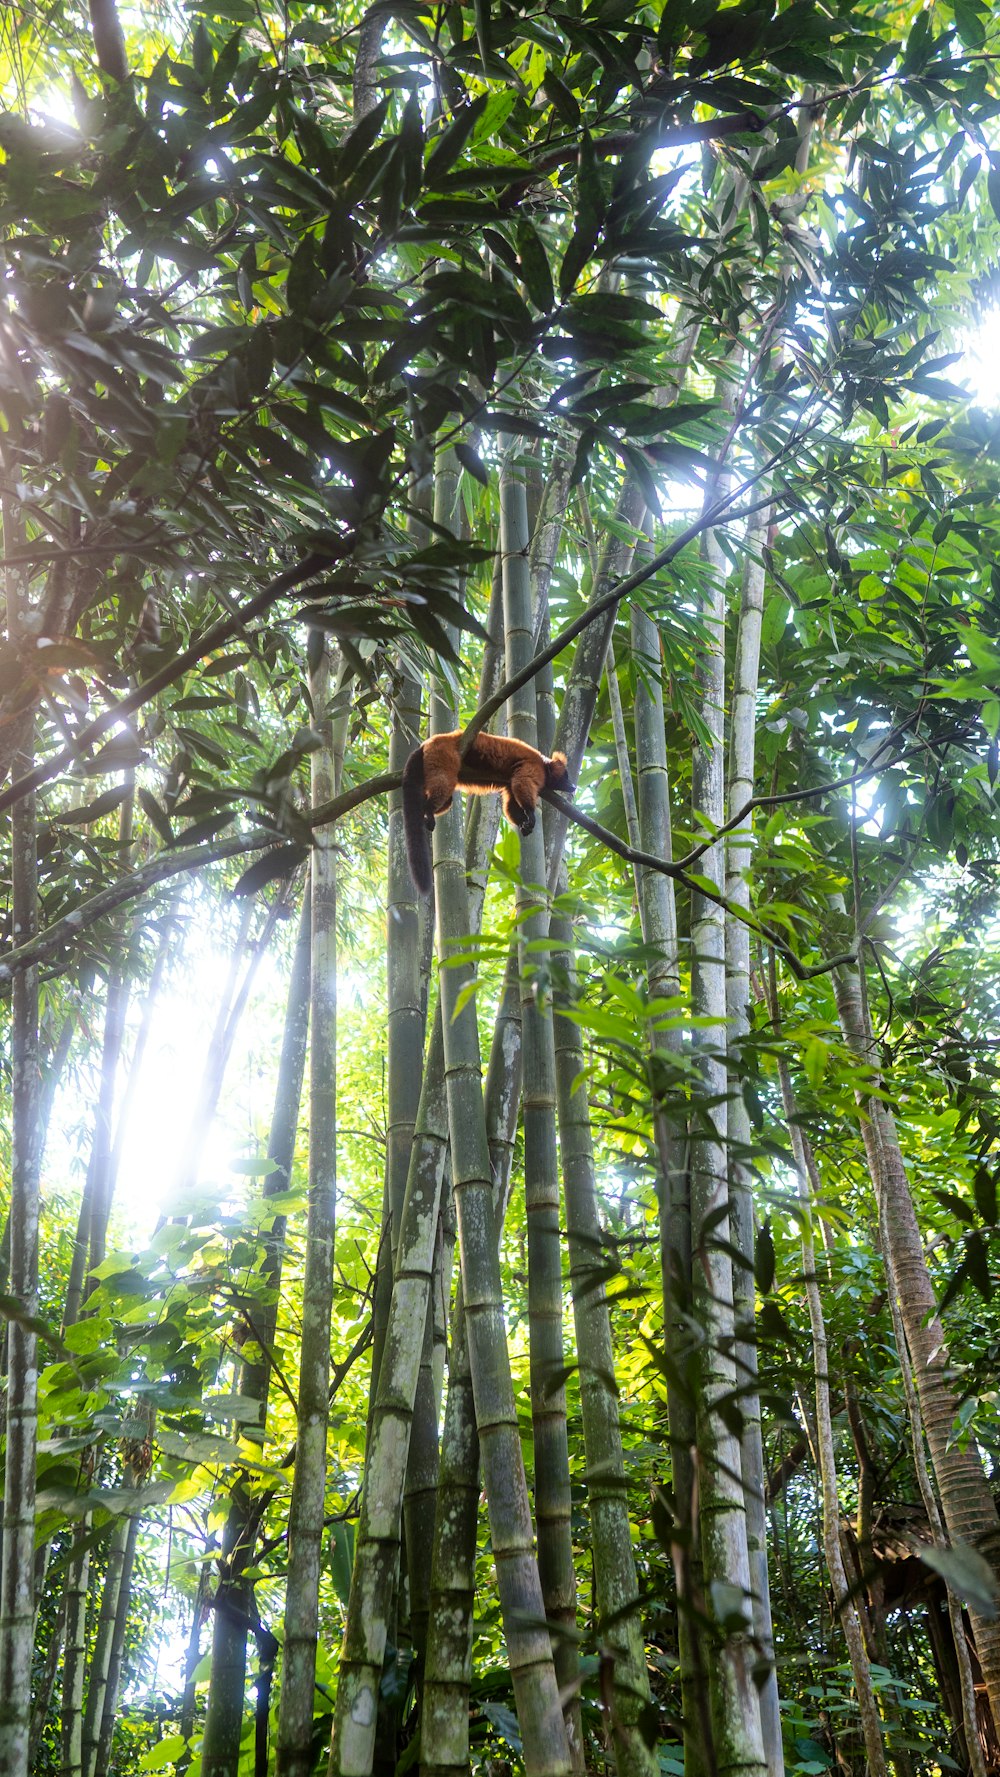 a monkey hanging from a tree in a forest